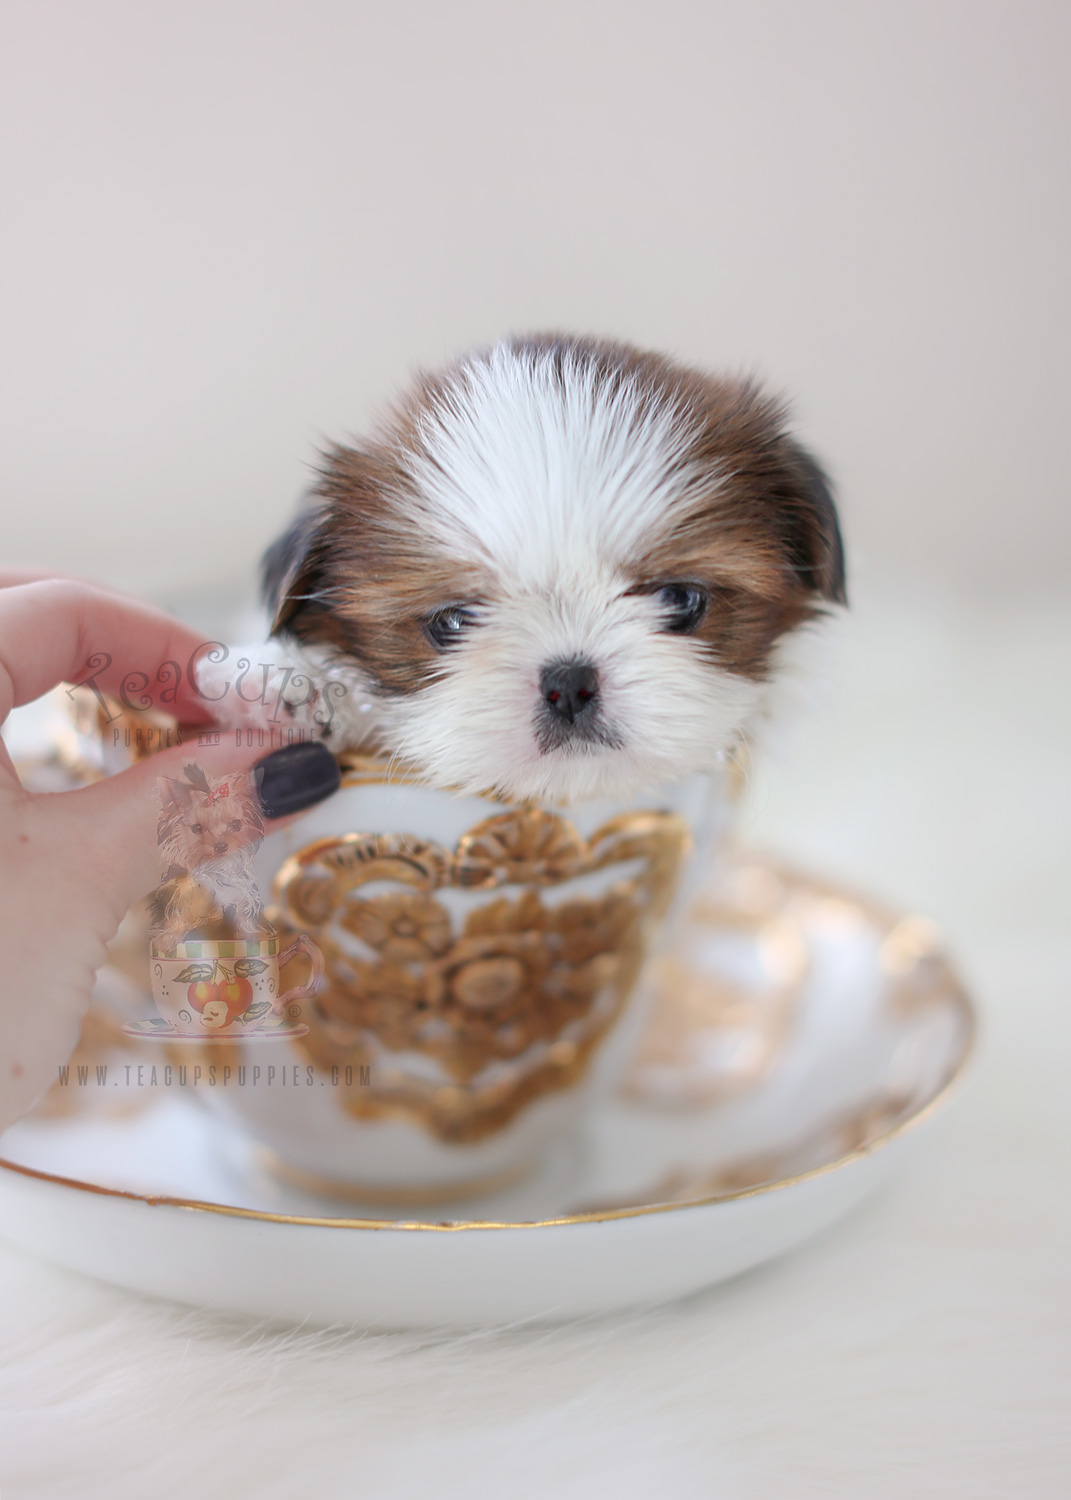 Tiny Shih Tzu Puppy by TeaCup Puppies